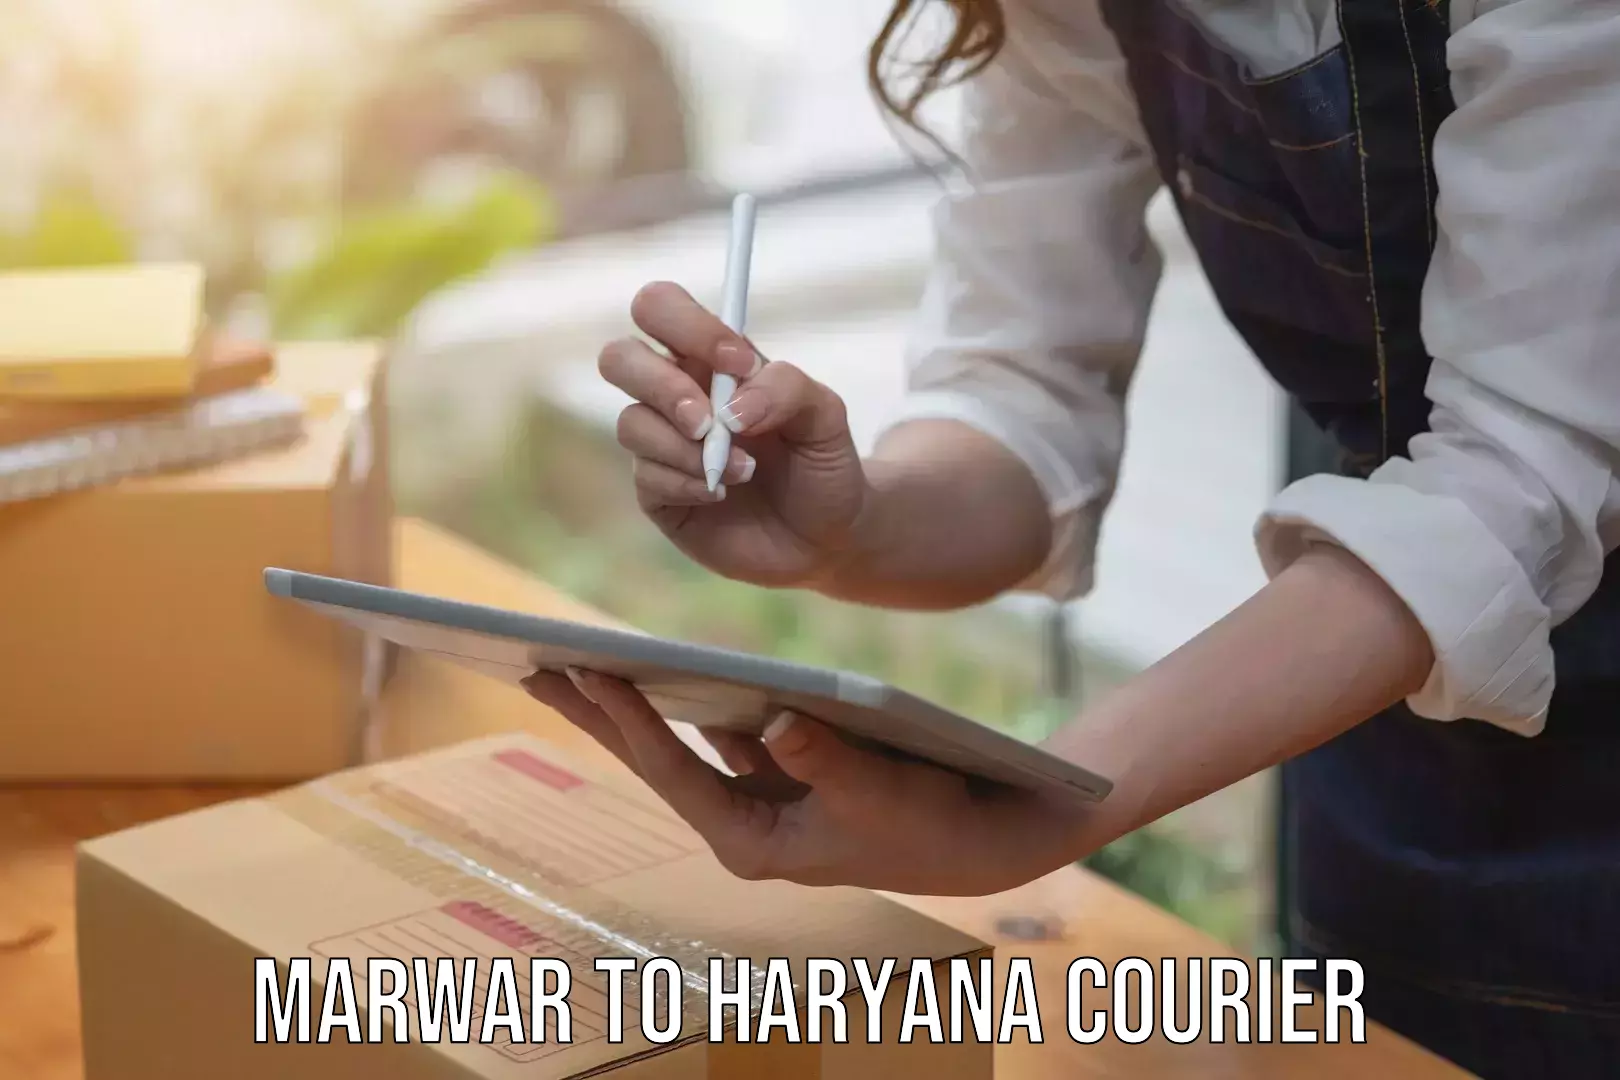 Personal parcel delivery in Marwar to Panchkula